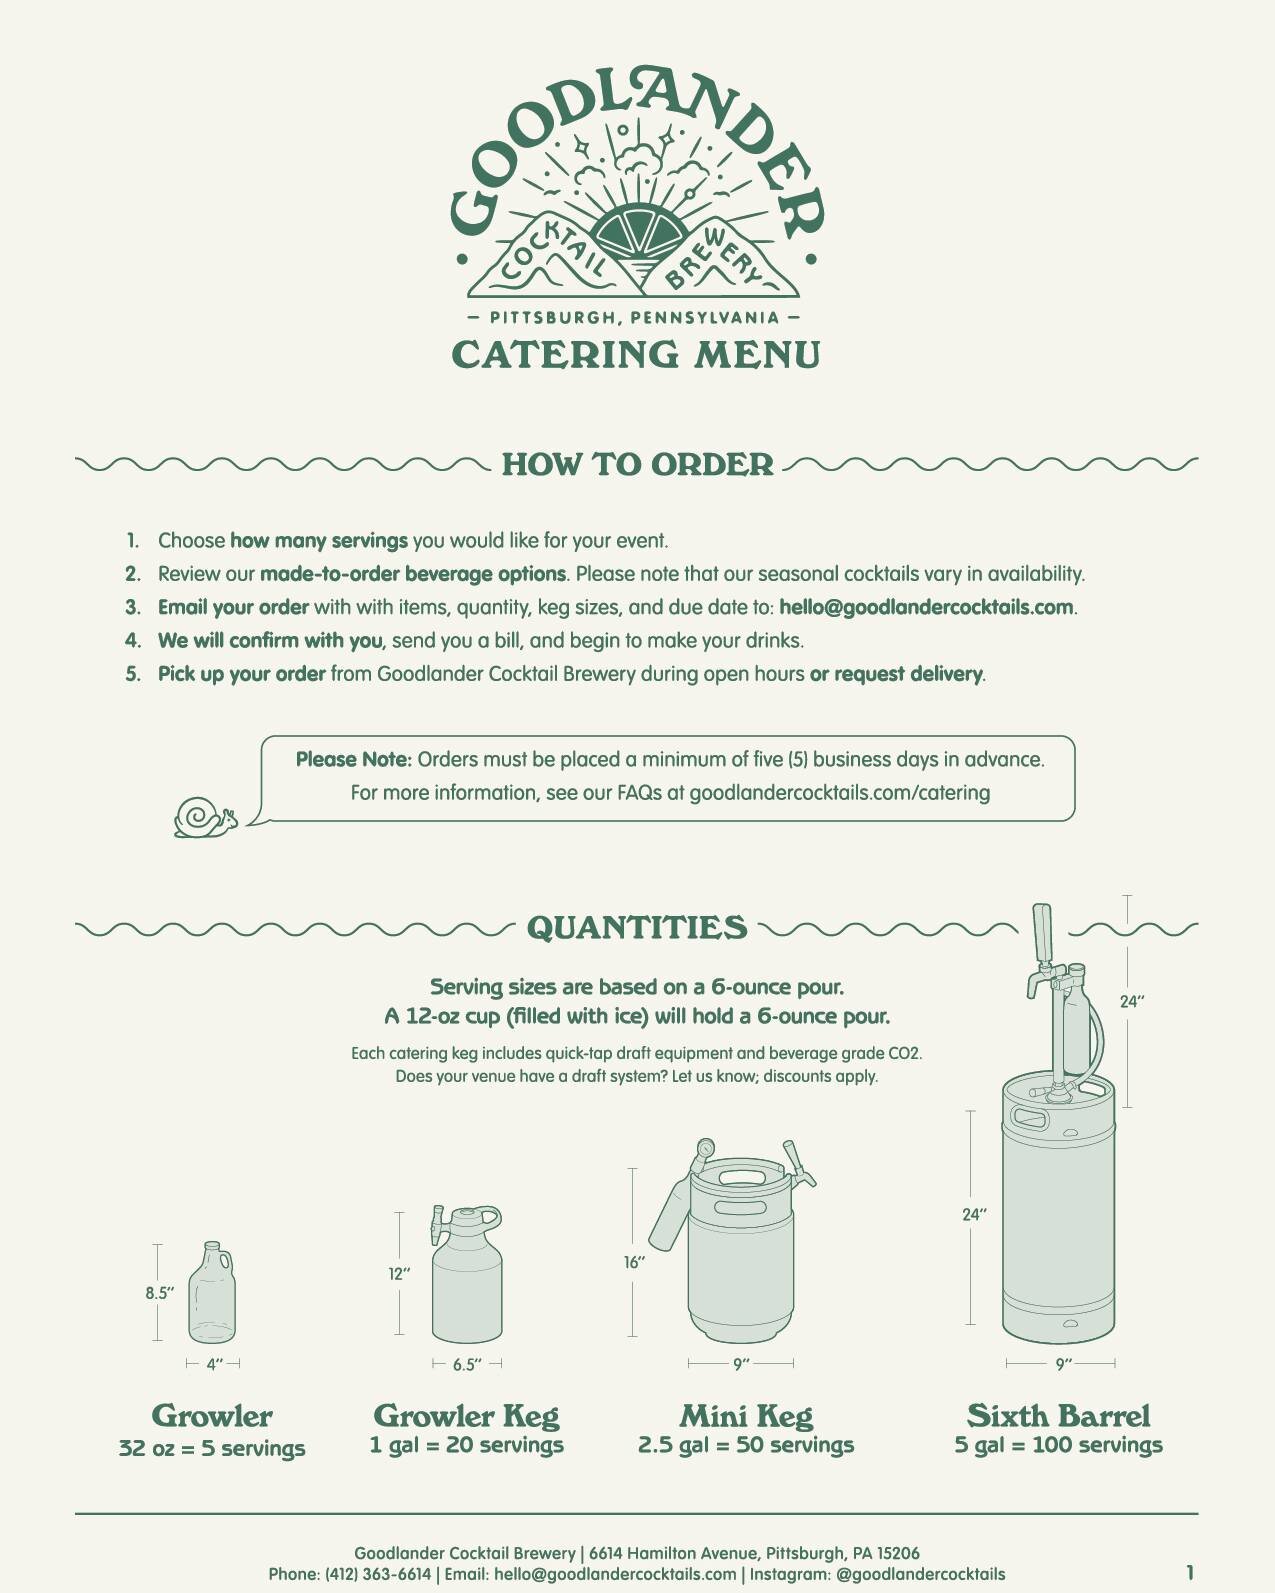 Need some drinks for your party, large or small? Check out our new catering menu redesign. @danielgurwindesign always keeping it clean 🤌 

#linkinbio for more information